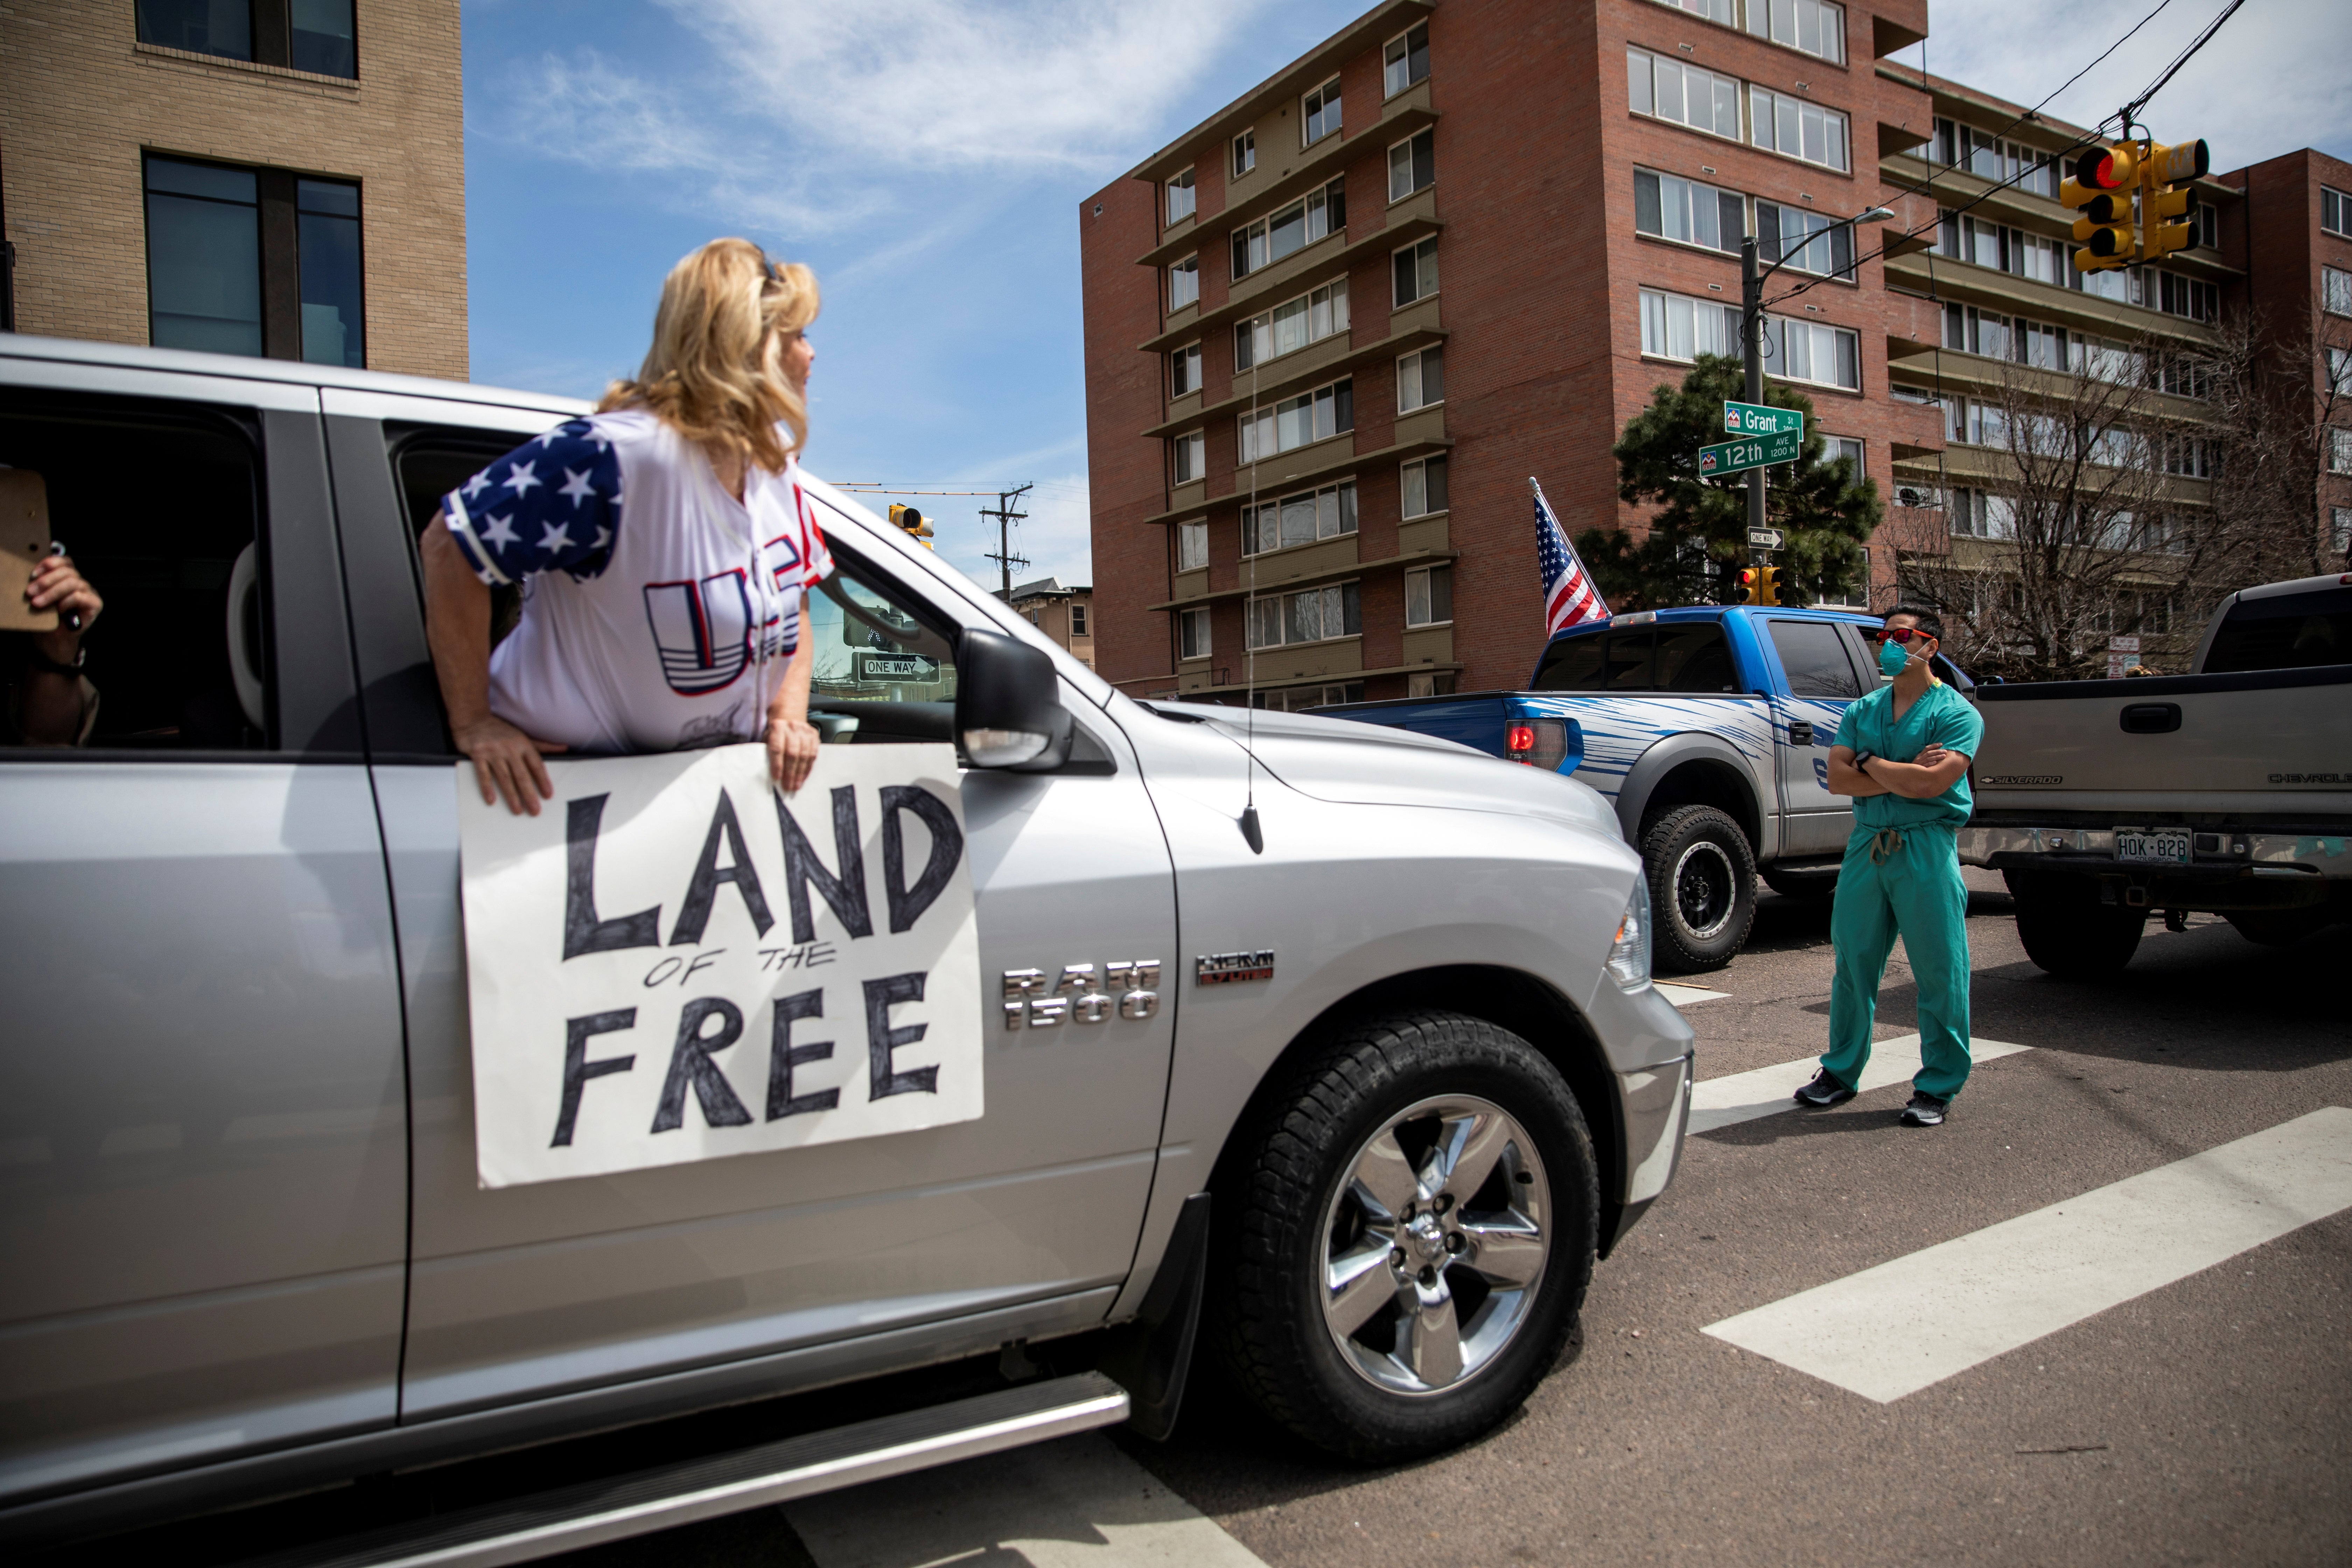 A woman pokes her body out of the passenger seat of a car, carrying a sign saying "Land of the Free." In front of the car, a medical worker in a mask stands with arms crossed.